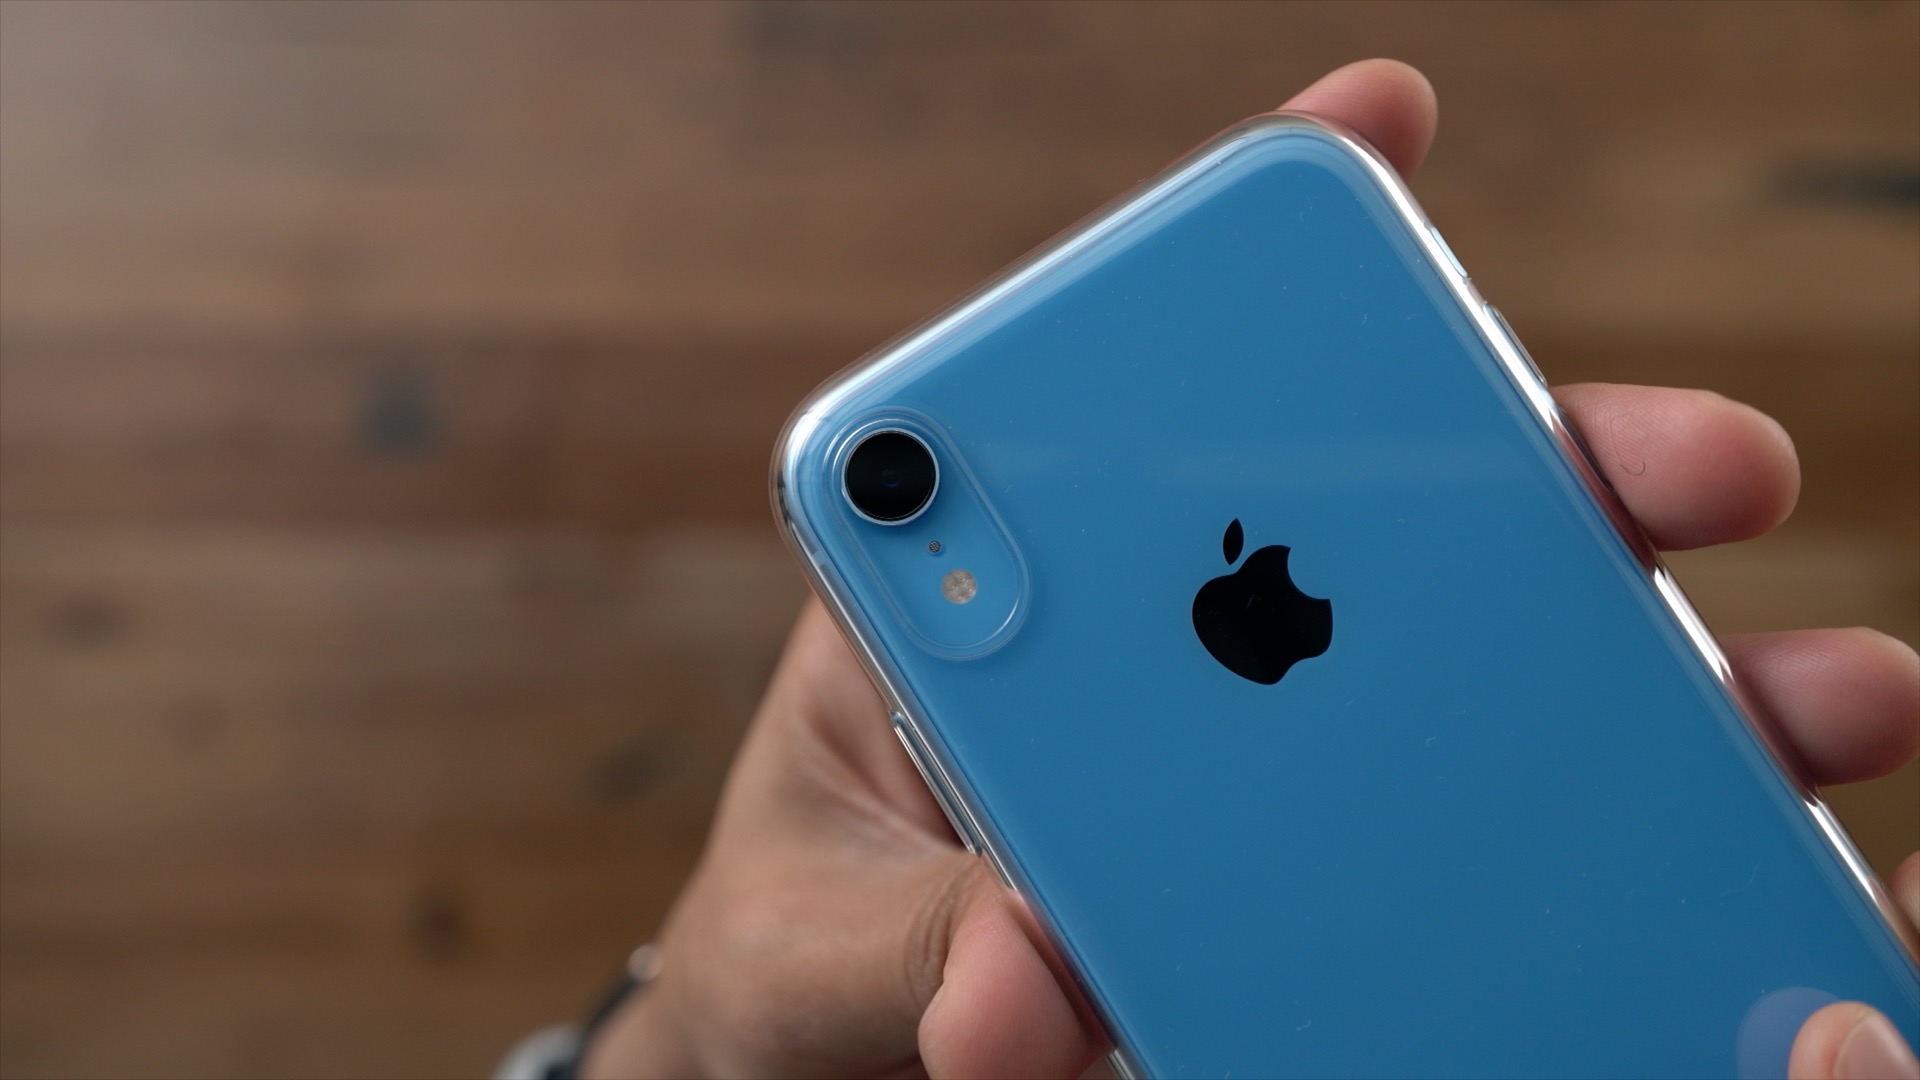 iPhone XR vs iPhone XS: Which should you buy? - 9to5Mac